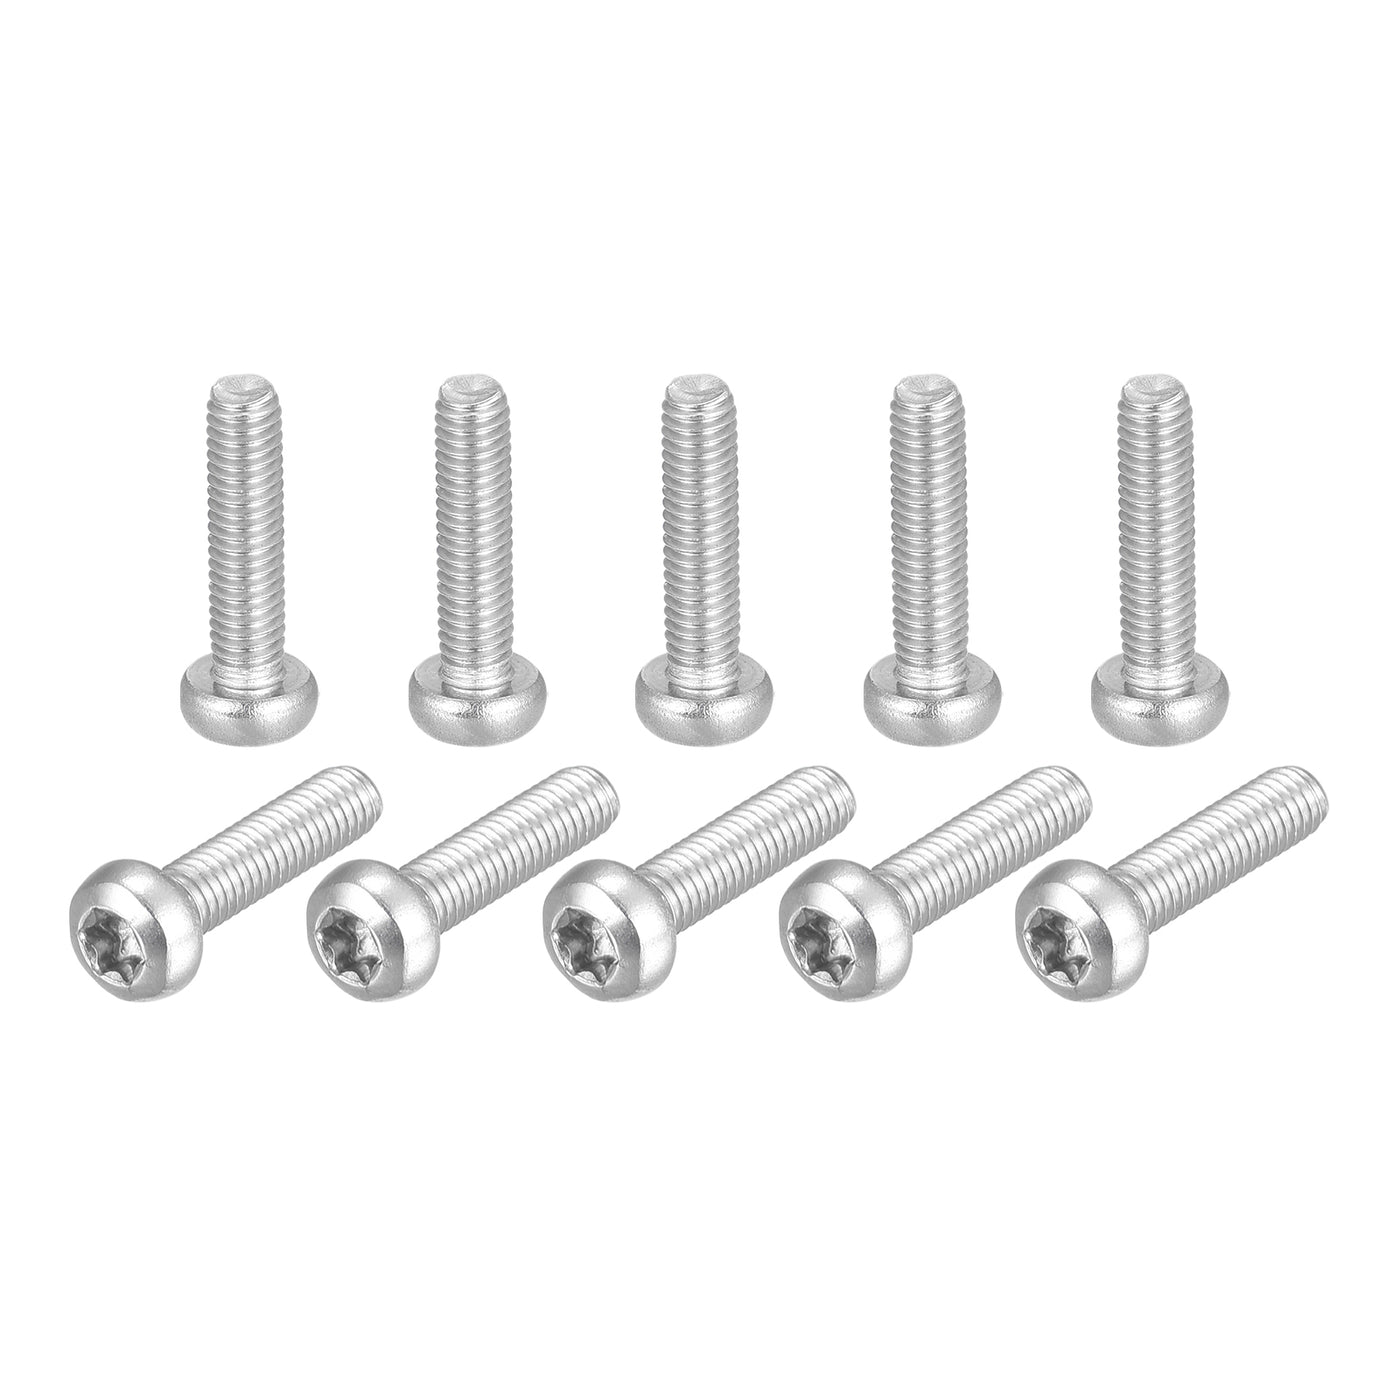 uxcell Uxcell M3x12mm Torx Security Machine Screws, 20pcs 316 Stainless Steel Pan Head Screw